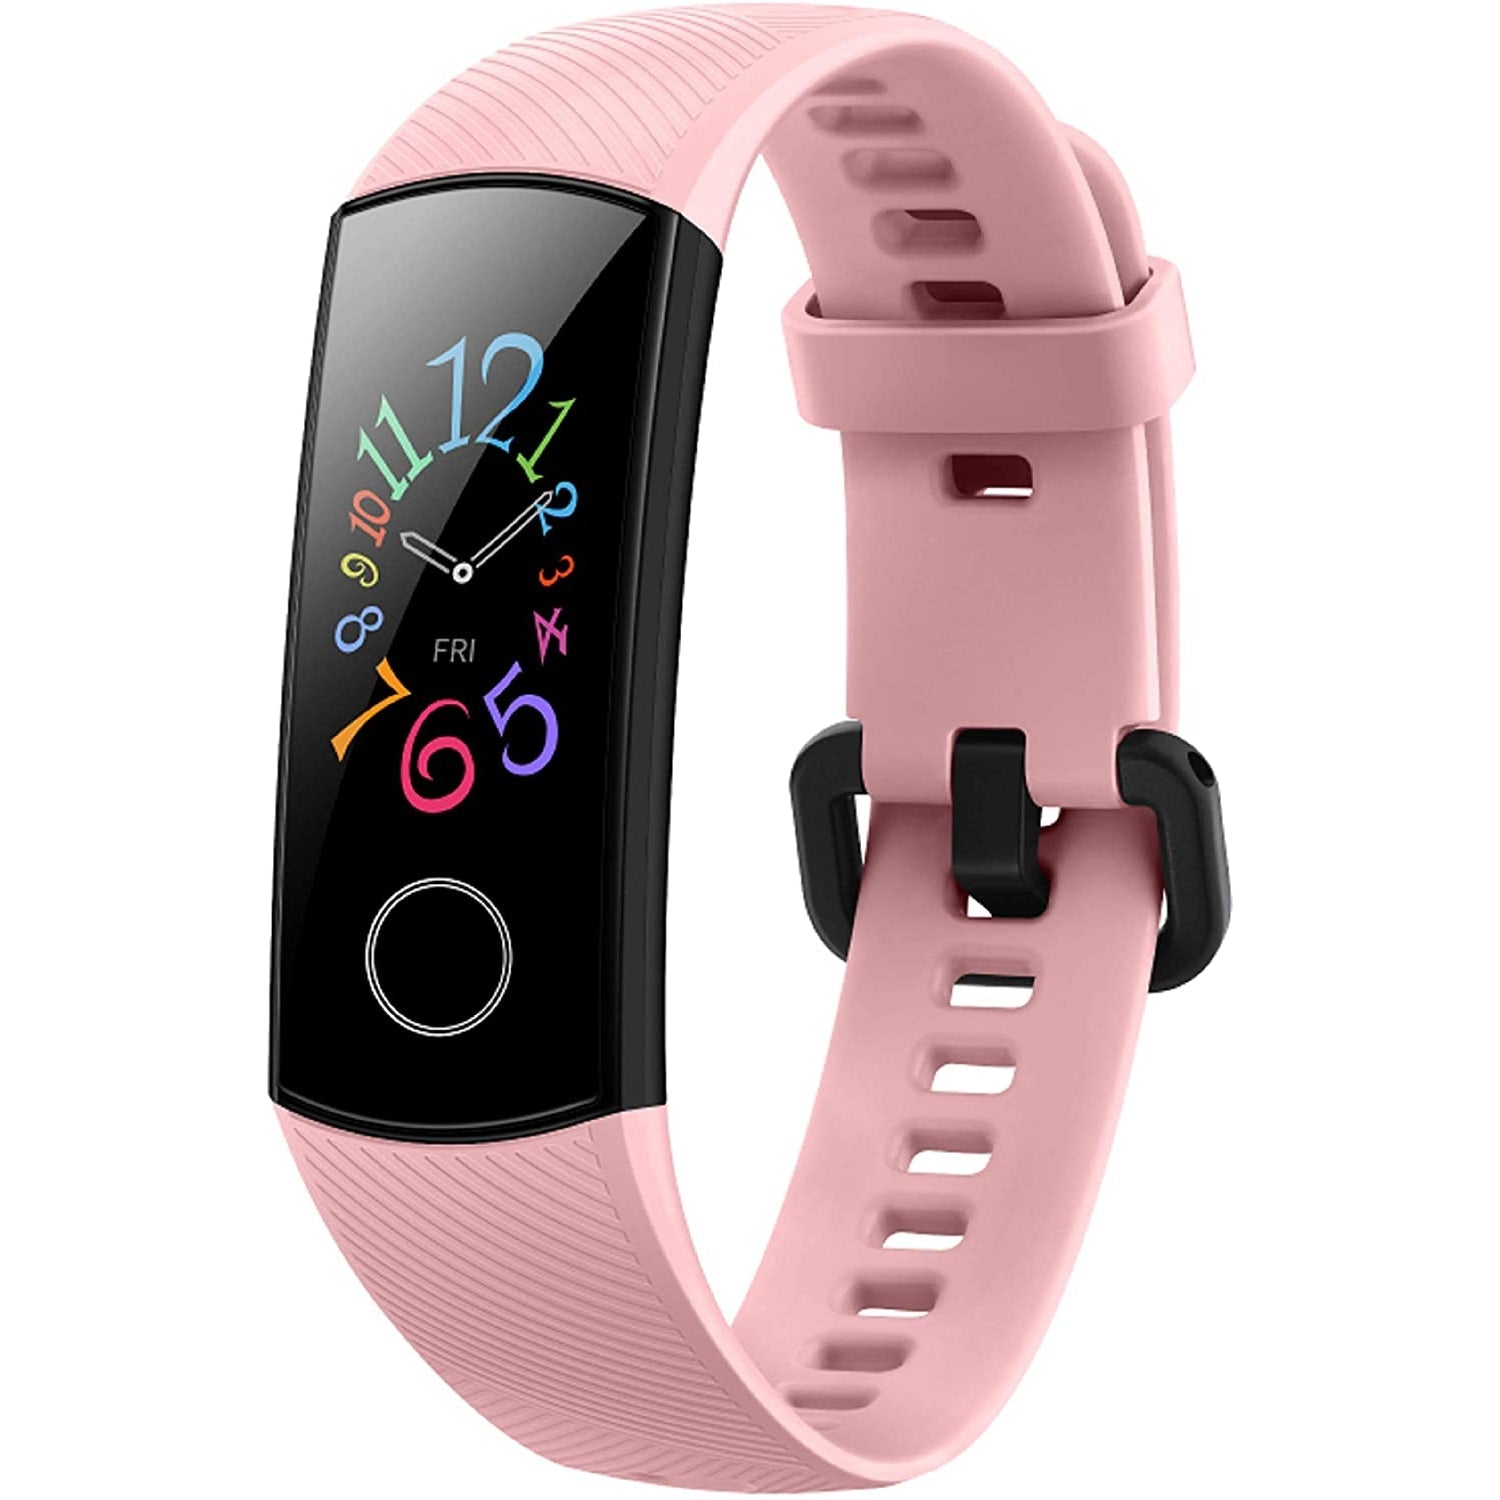 HONOR Band 5 Fitness Tracker with SpO2 Heart Rate and Sleep Monitor - Coral Pink - Refurbished Excellent